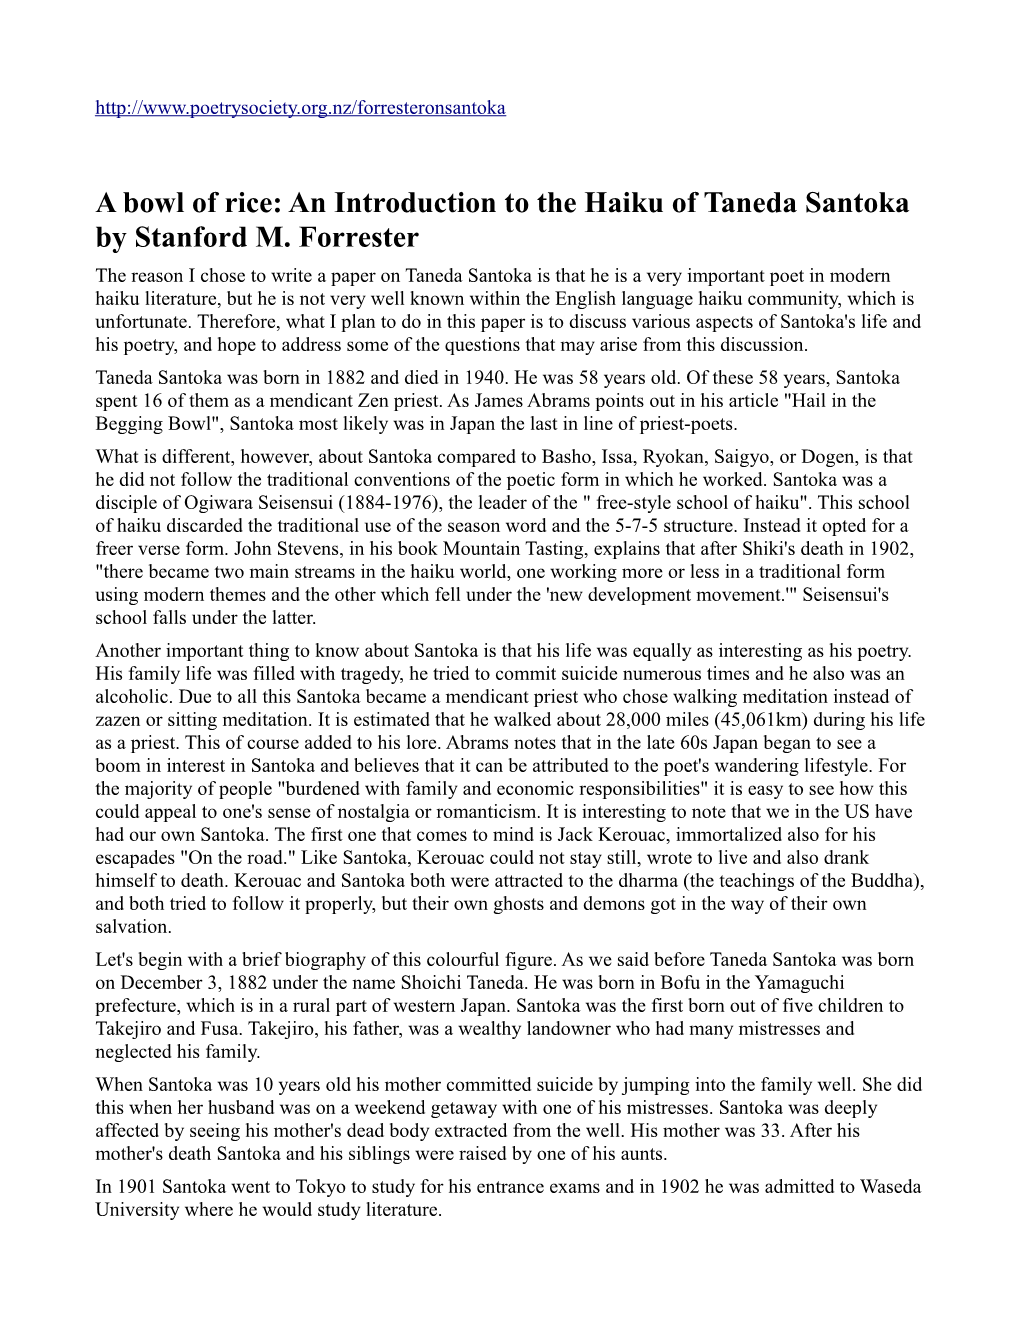 An Introduction to the Haiku of Taneda Santoka by Stanford M. Forrester